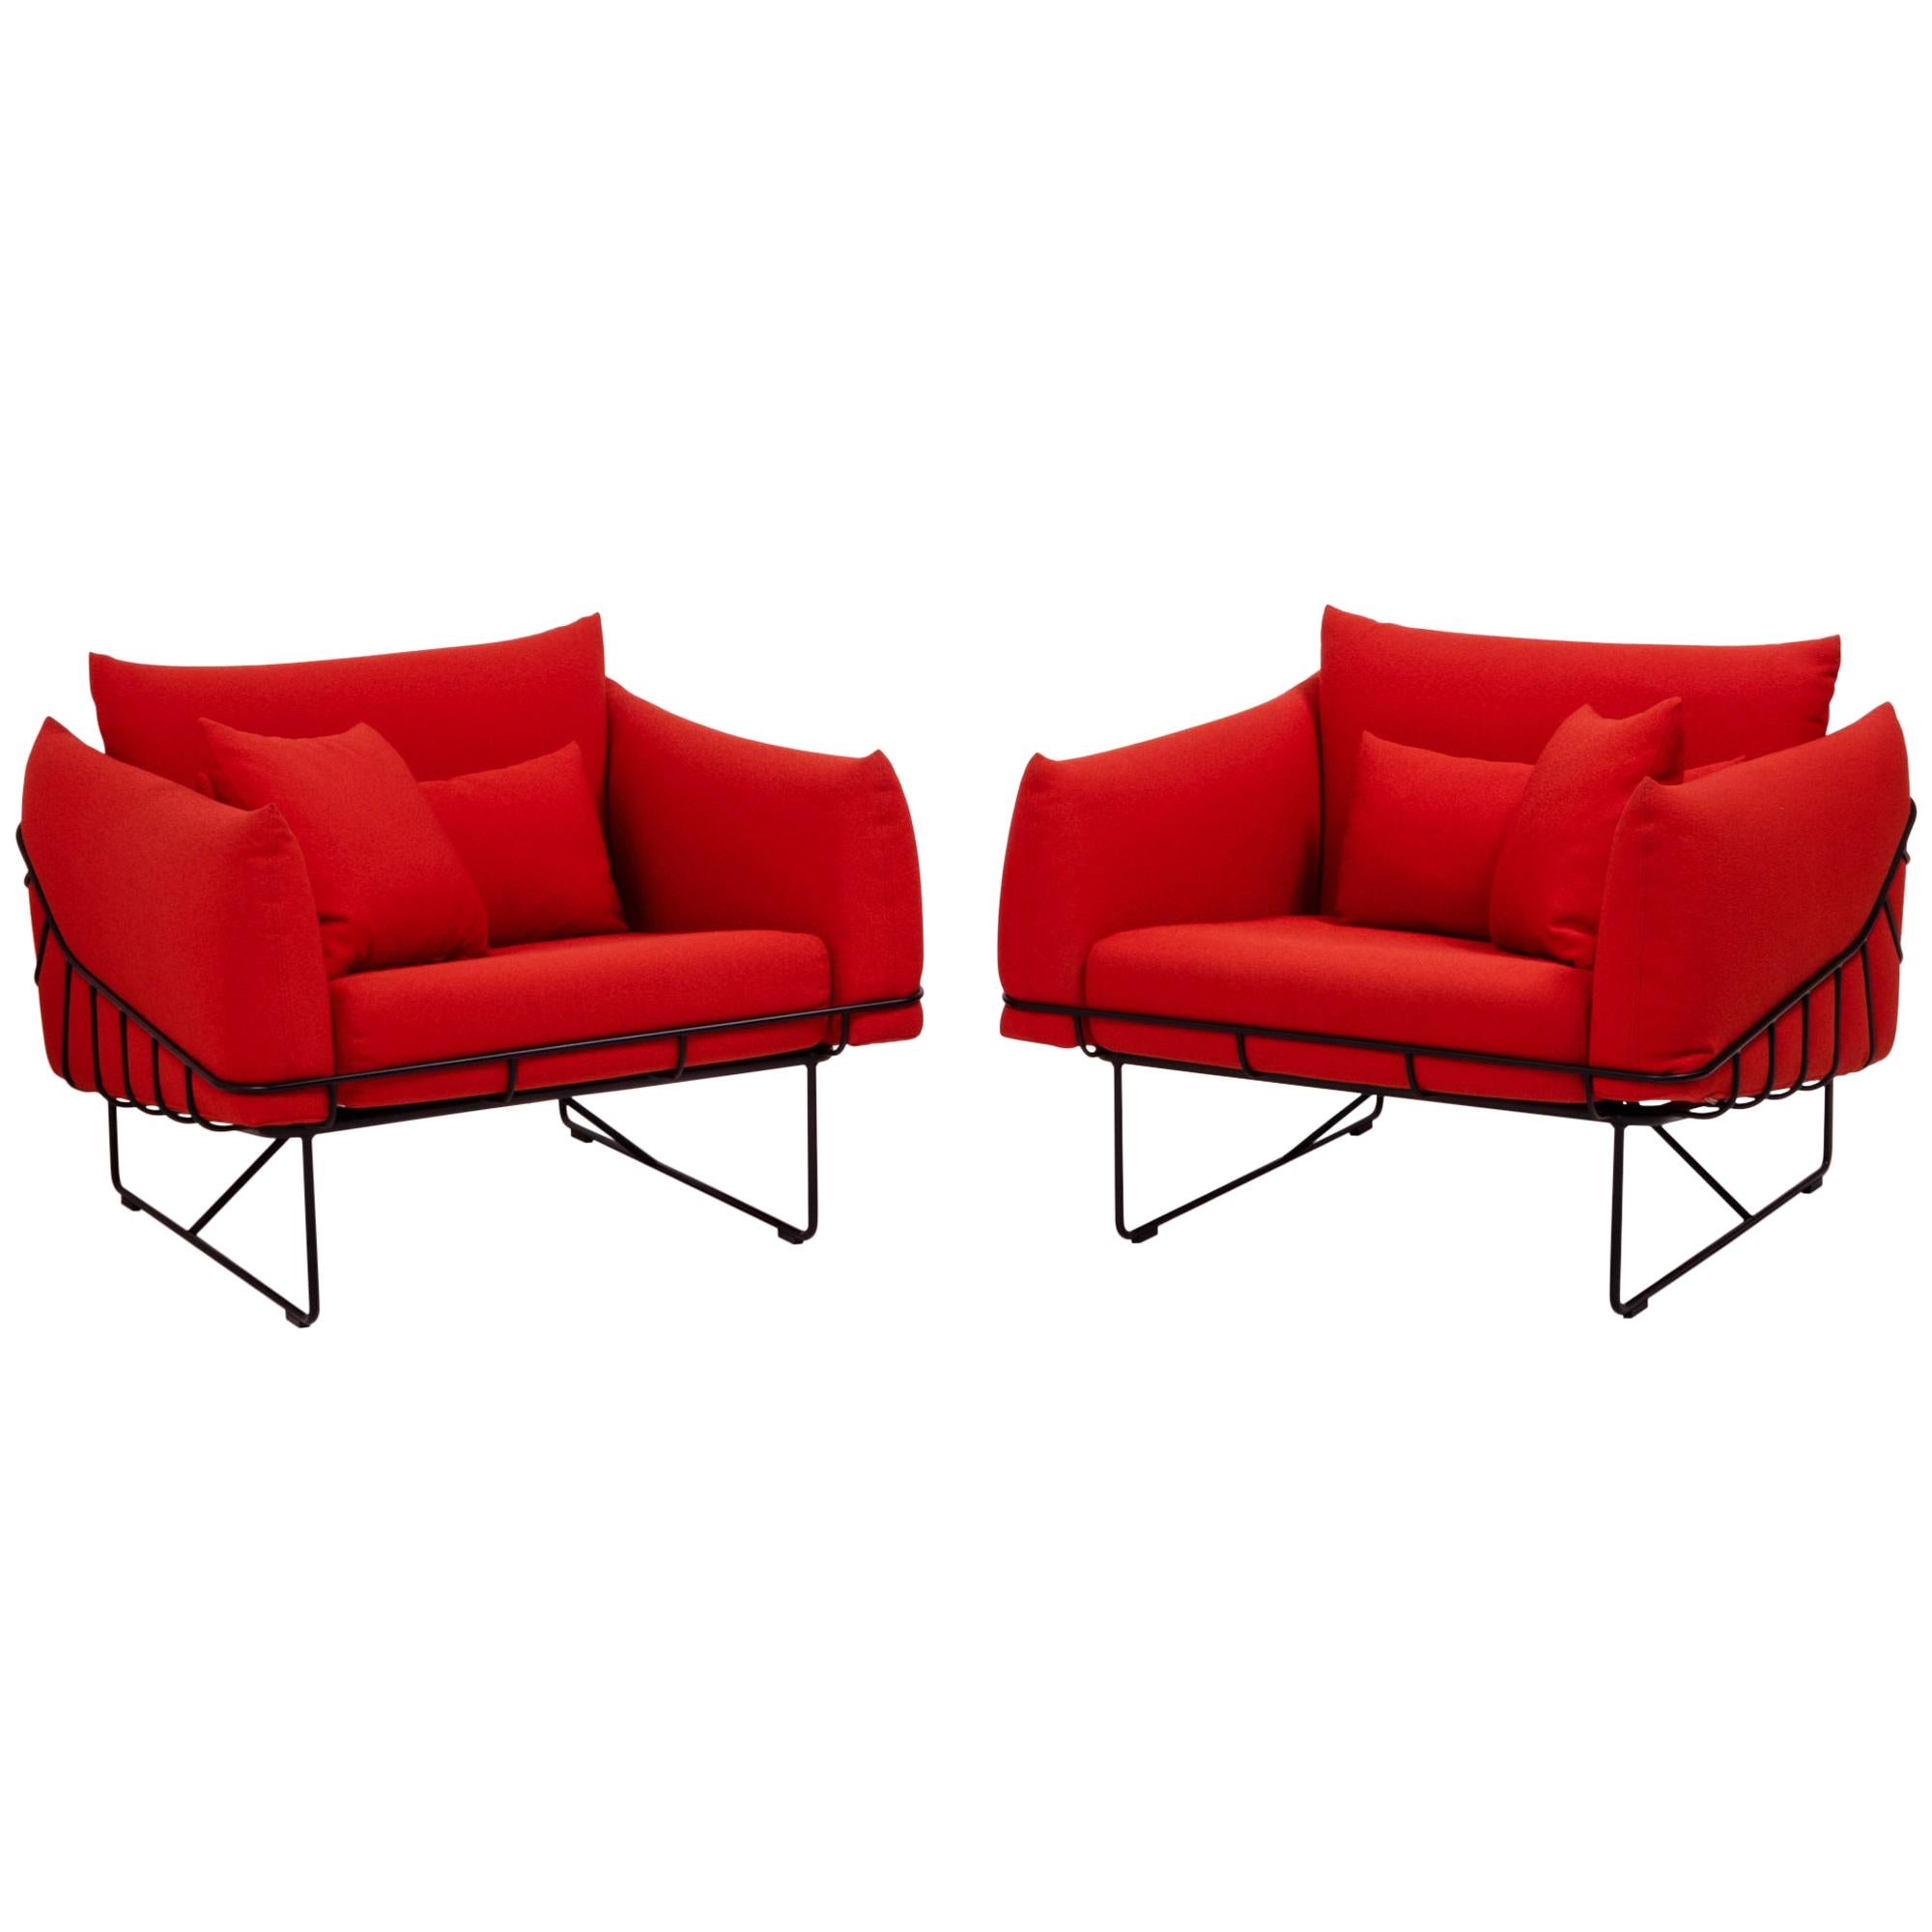 Red Wireframe Lounge Chairs by Herman Miller, 2013, set of 2